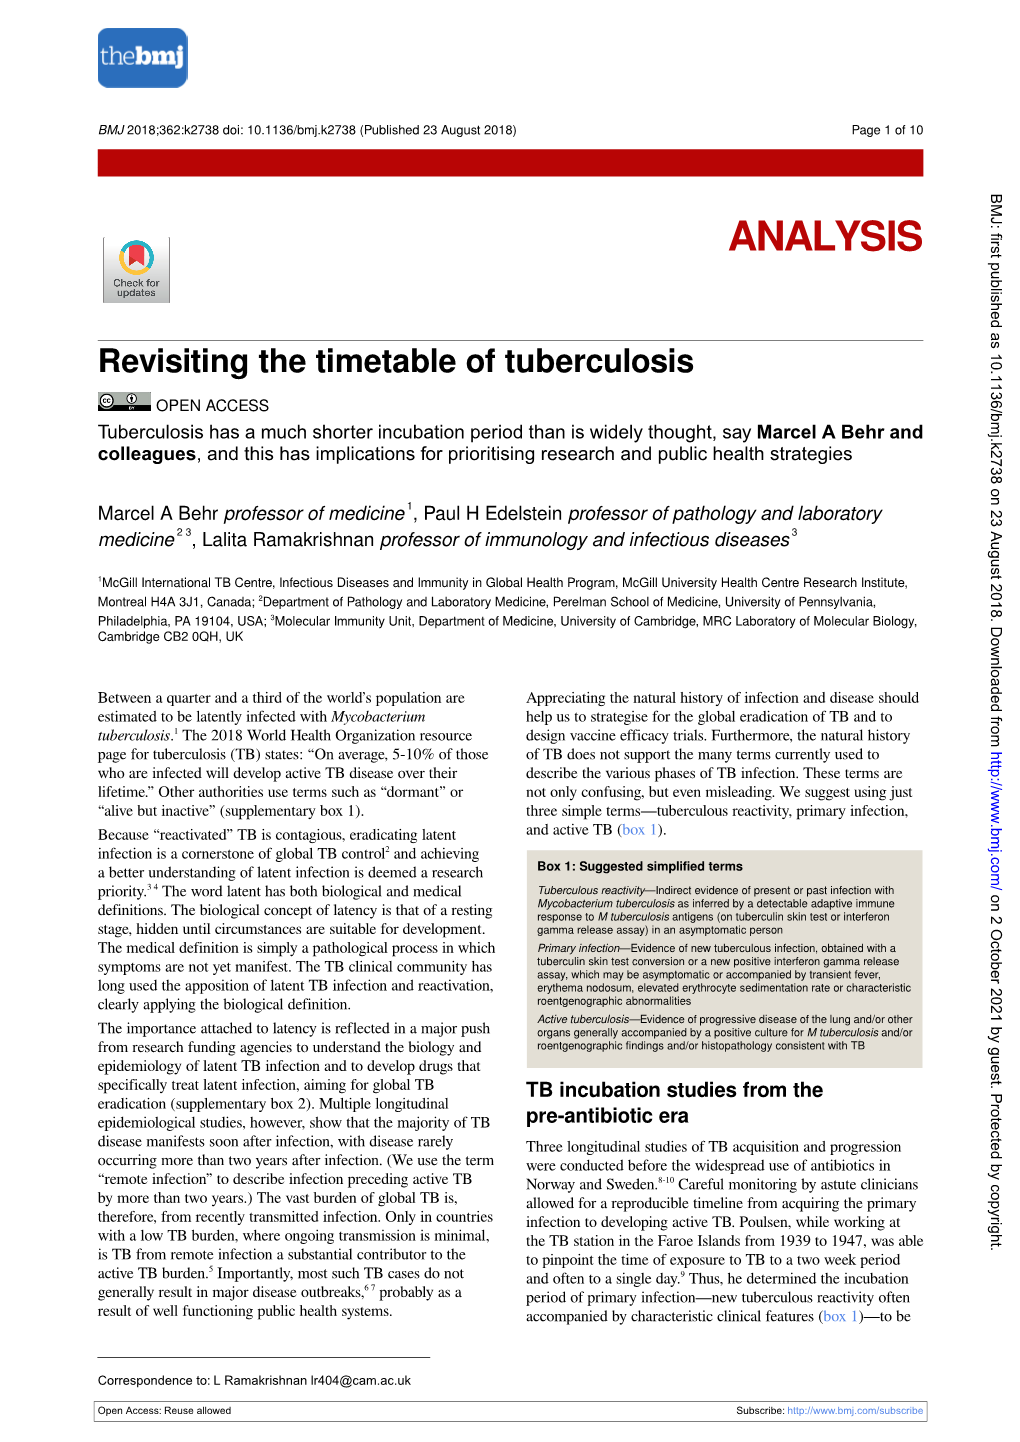 Revisiting the Timetable of Tuberculosis